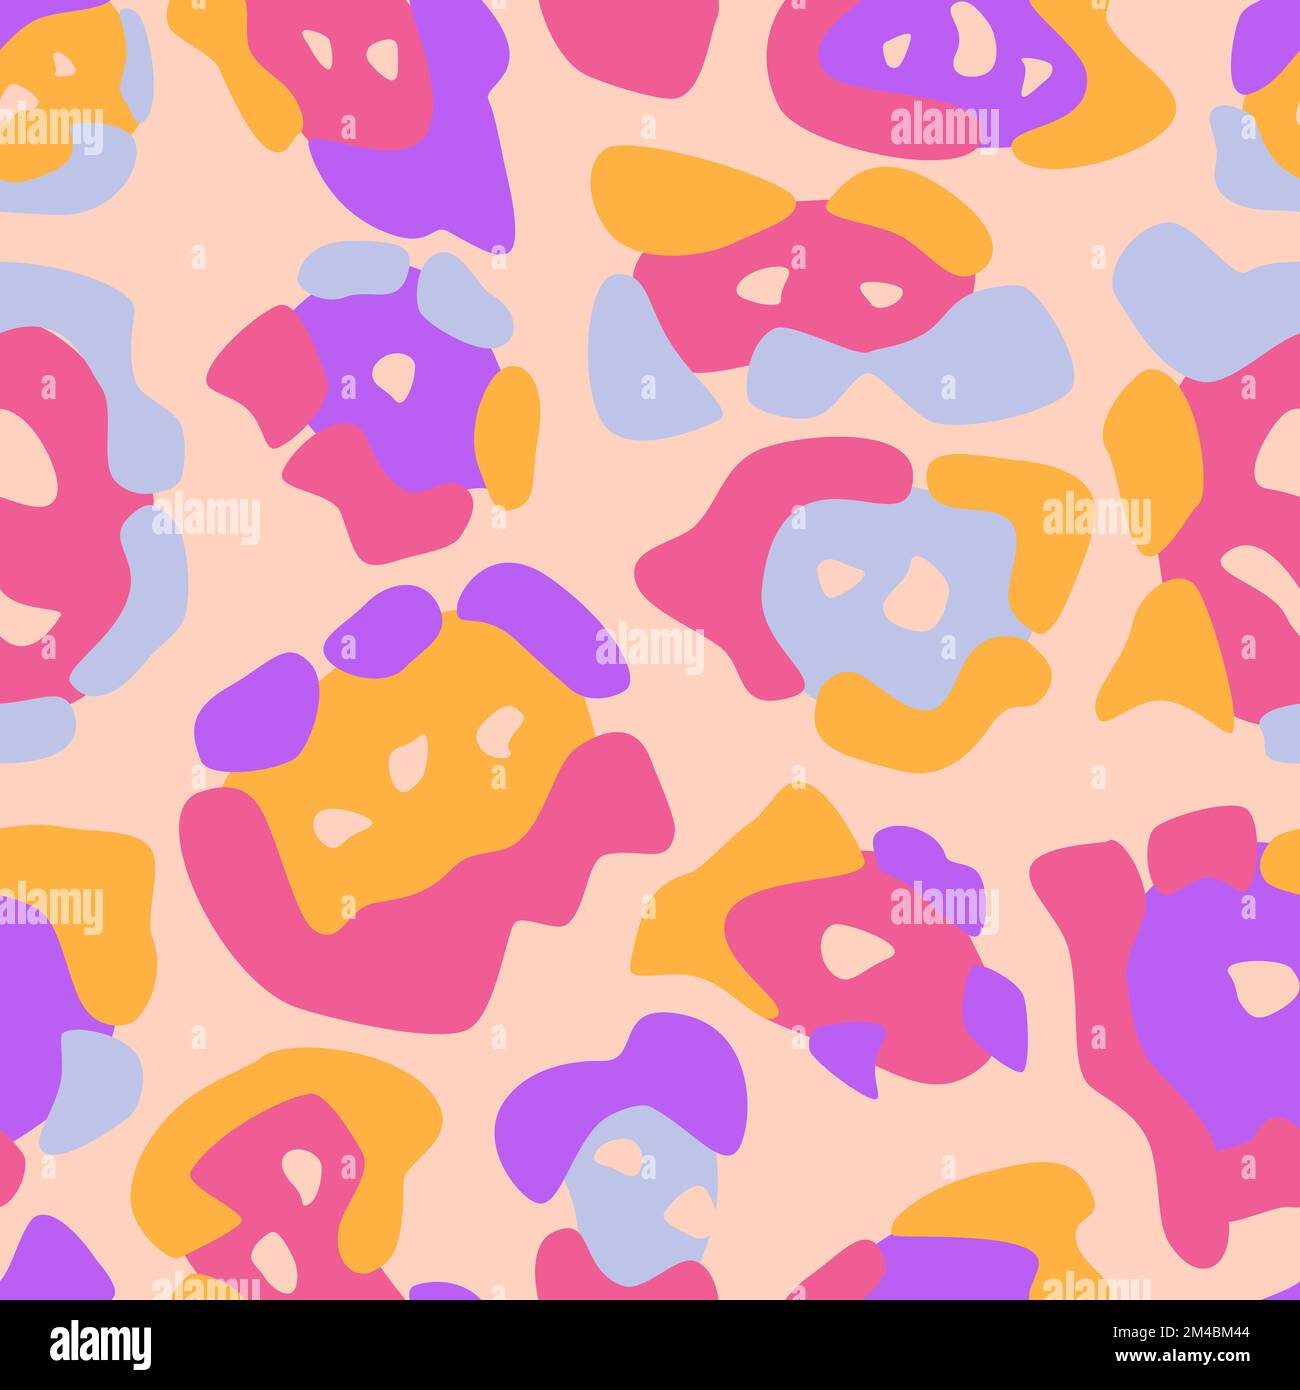 Animal skin abstract seamless pattern rainbow 90s style. Jaguar spots background. Chaotic blobs, psychedelic cat skin. Vector illustration. Stock Vector